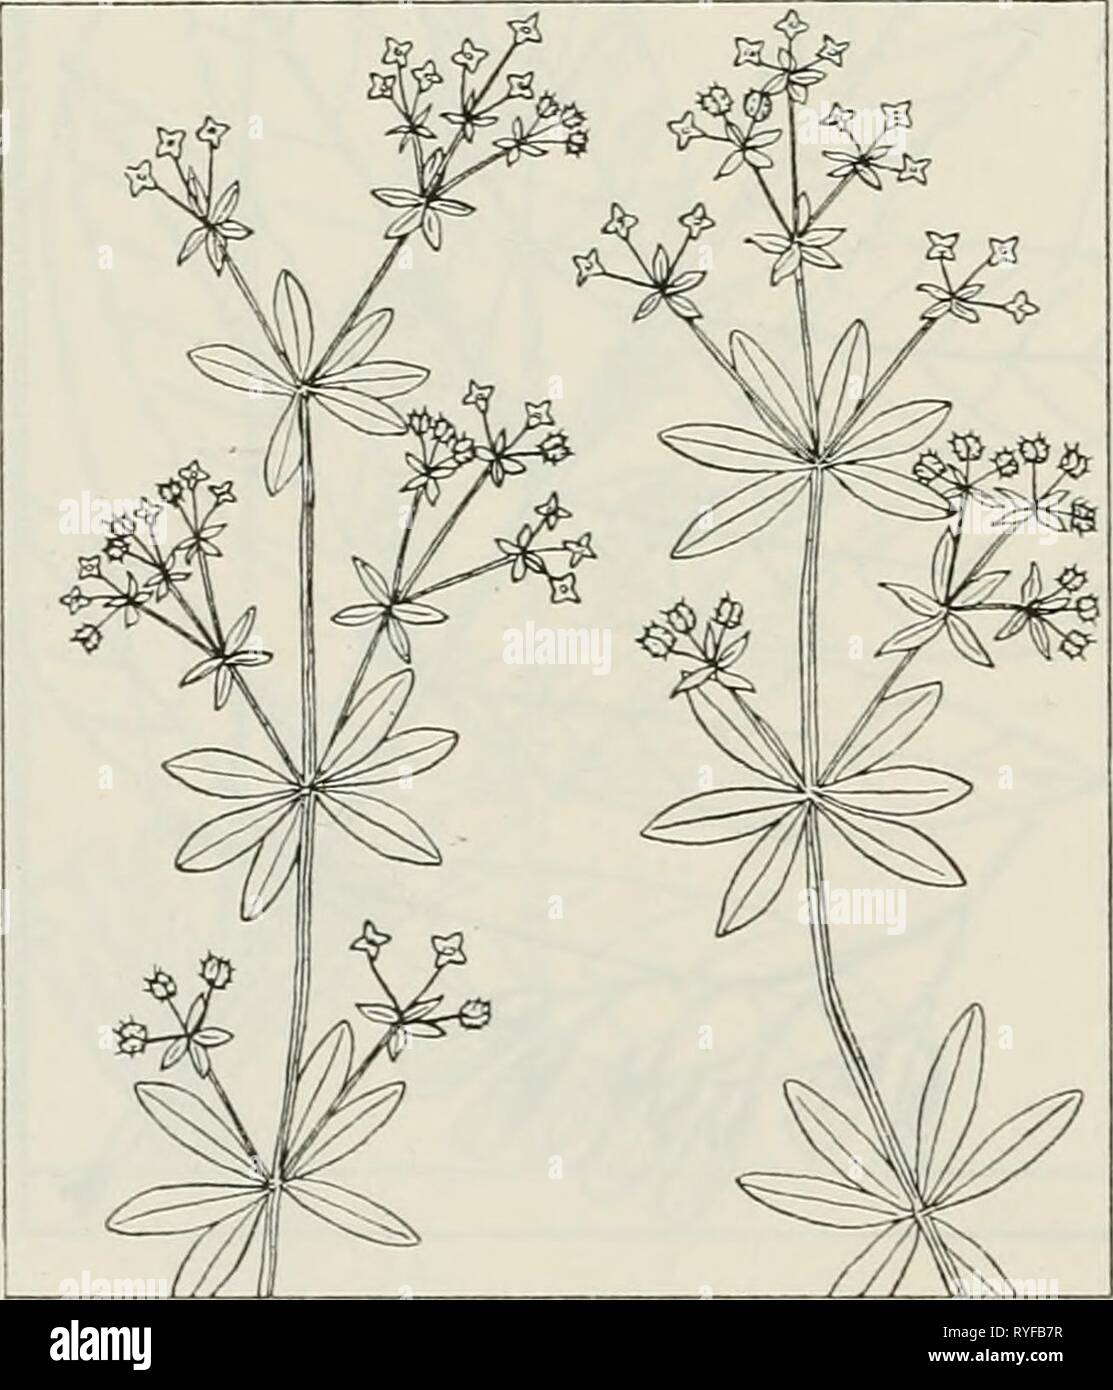 The drug plants of Illinois  drugplantsofilli44teho Year: 1951  GALIUM APARINE L. Cleaver's herb, cleavers, goose grass. Rubiaceae. —A low, weak, reclining or scrambling, prickly herb, annual; stem square, with recurved prickles, 2 to 5 feet long; leaves oblanceolate, 1 to 3 inches long, 6 or 8 at a node, hispid and rough on the margin and midrib; flowers white, small, in groups (1 to 3) on axillary peduncles; fruit appearing double, fleshy, covered with hooked prickles. The herb collected. Common through- out the state in gardens, along roads and streams, and in moist woods; May and early Jun Stock Photo